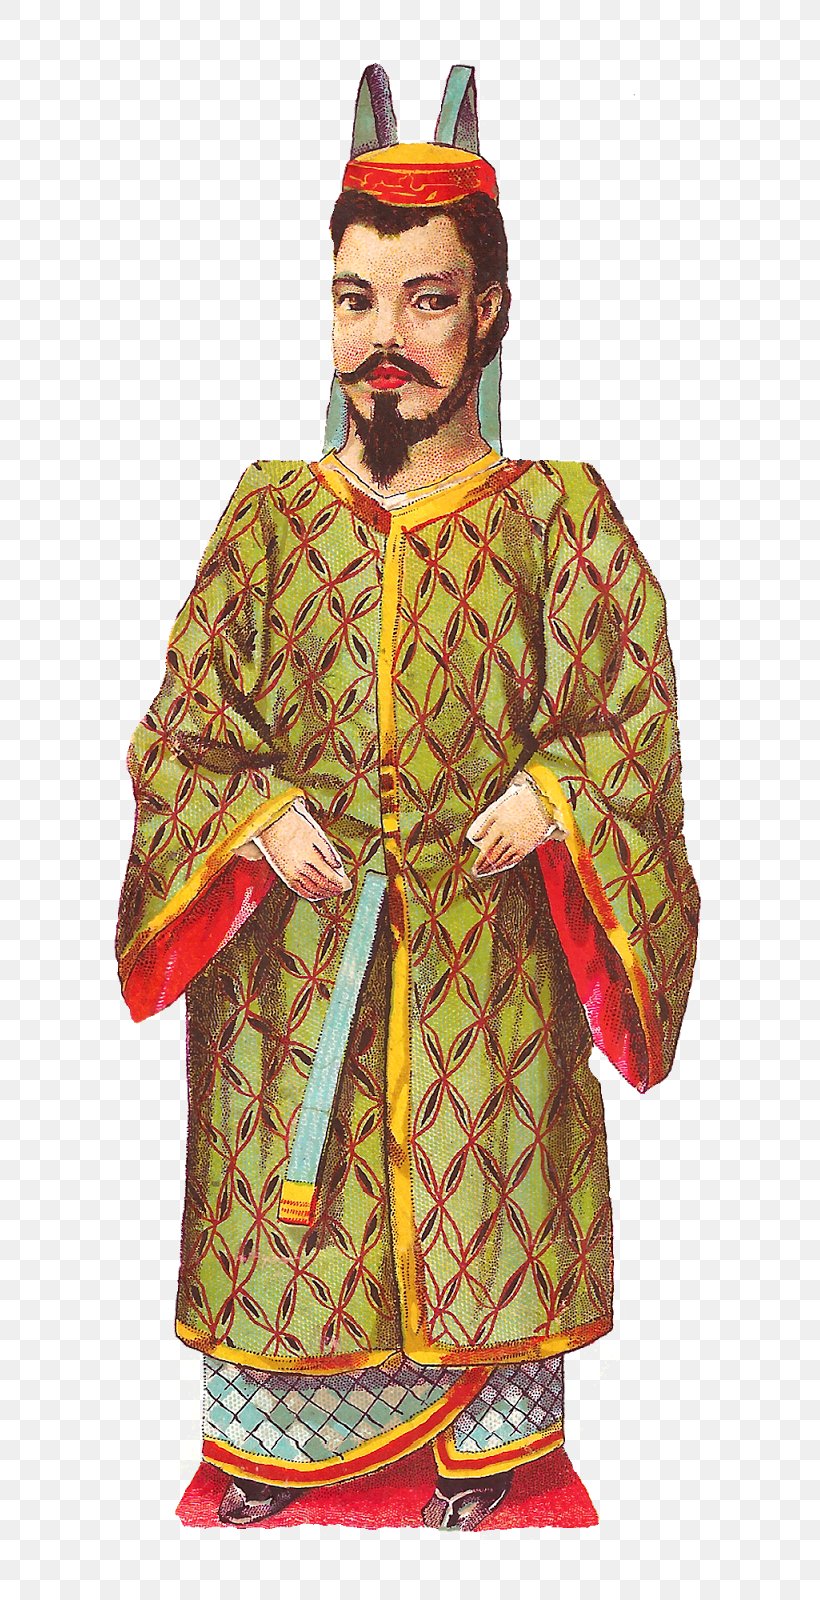 Emperor Of Japan Robe Clip Art, PNG, 719x1600px, Emperor Of Japan, Costume, Costume Design, Dress, Emperor Download Free